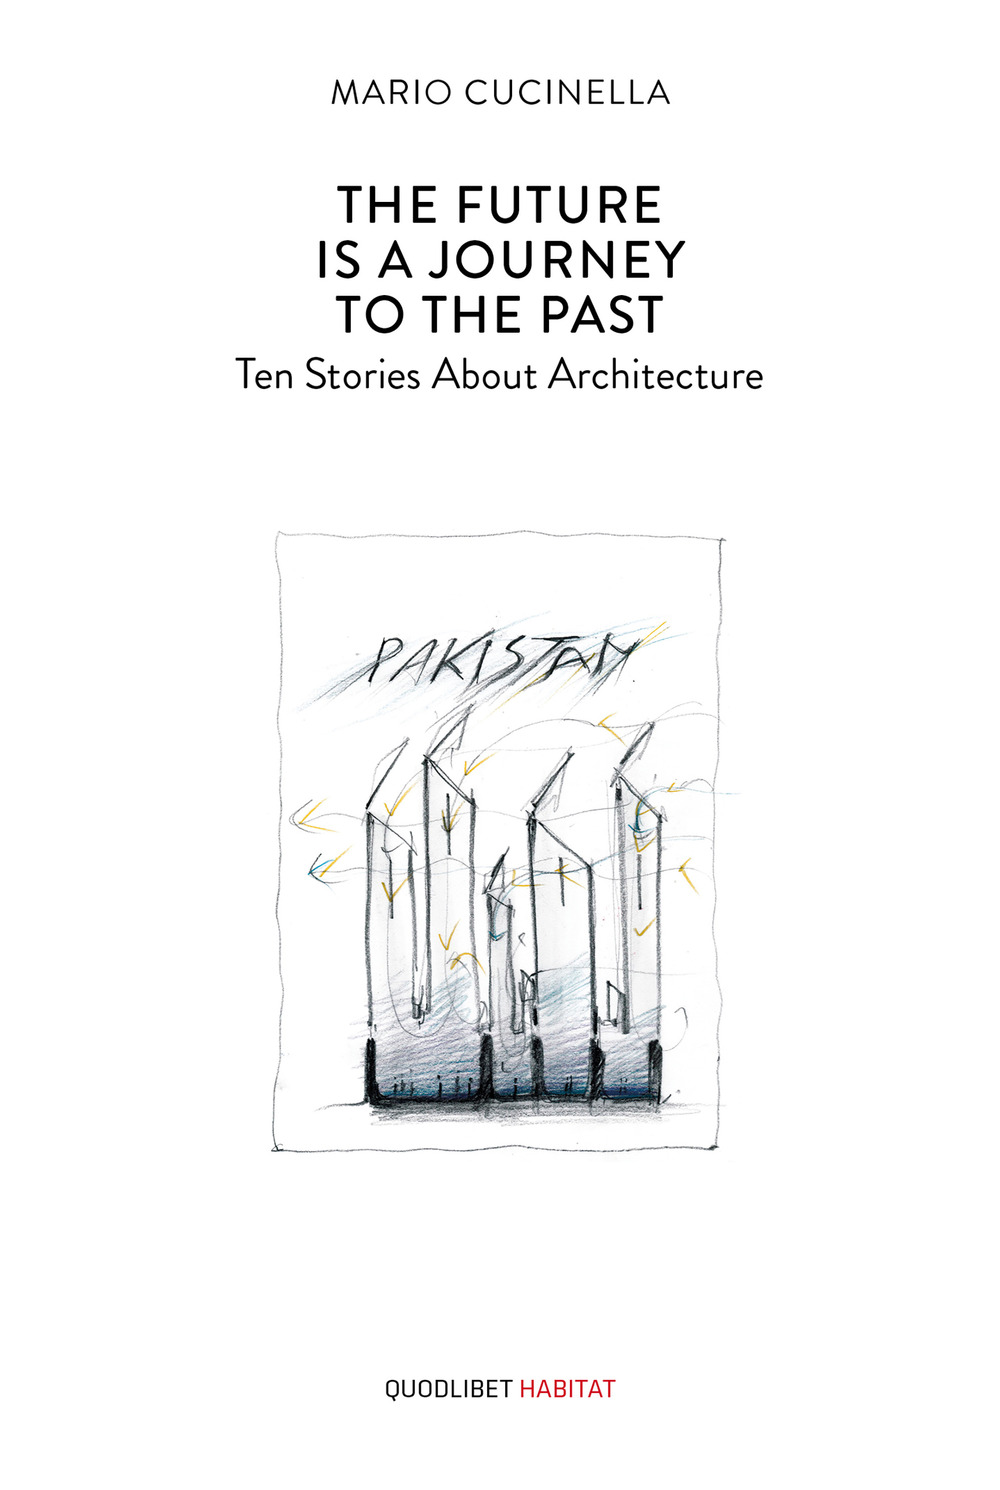 FUTURE IS A JOURNEY TO THE PAST. TEN STORIES ABOUT ARCHITECTURE (THE) - 9788822908247